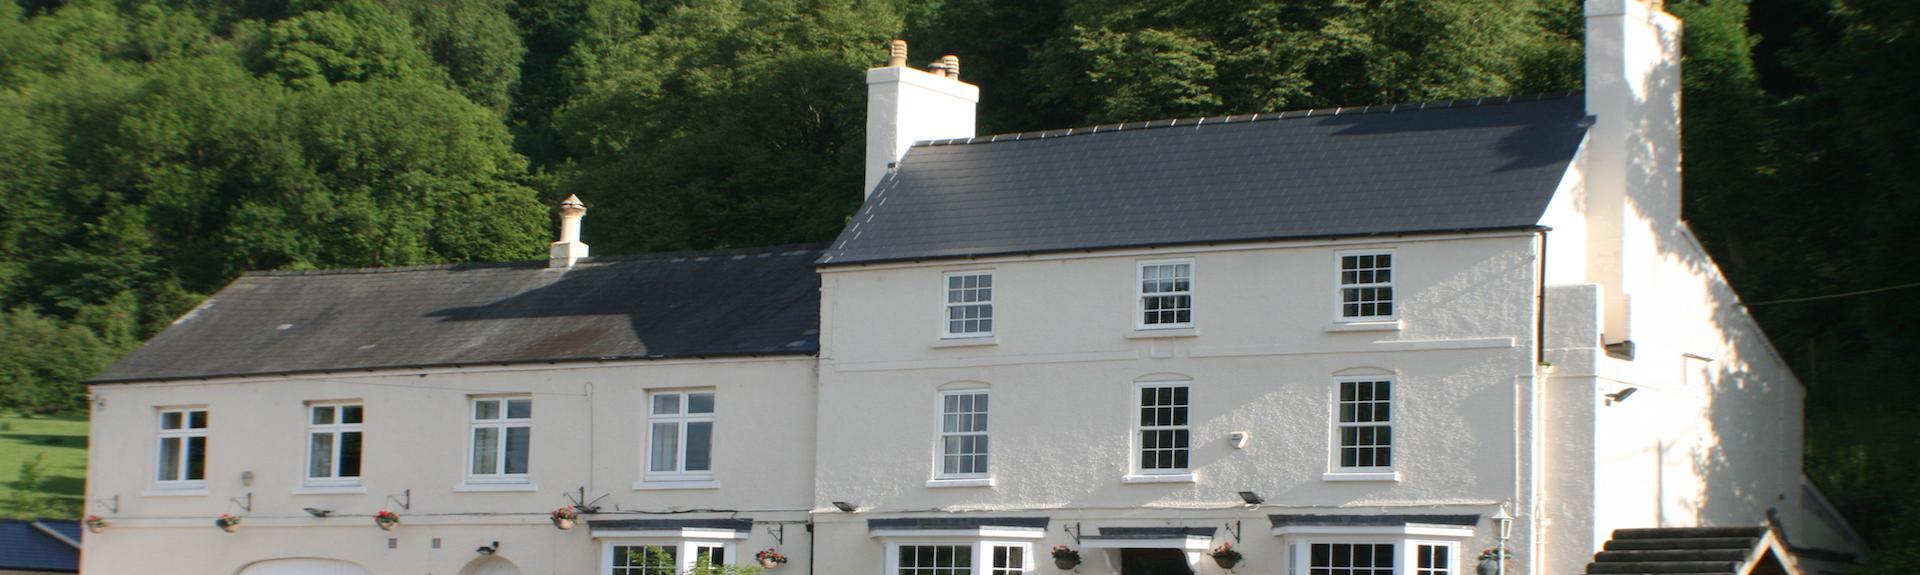 River Wye Lodge - Large Holiday Cottage in Herefordshire